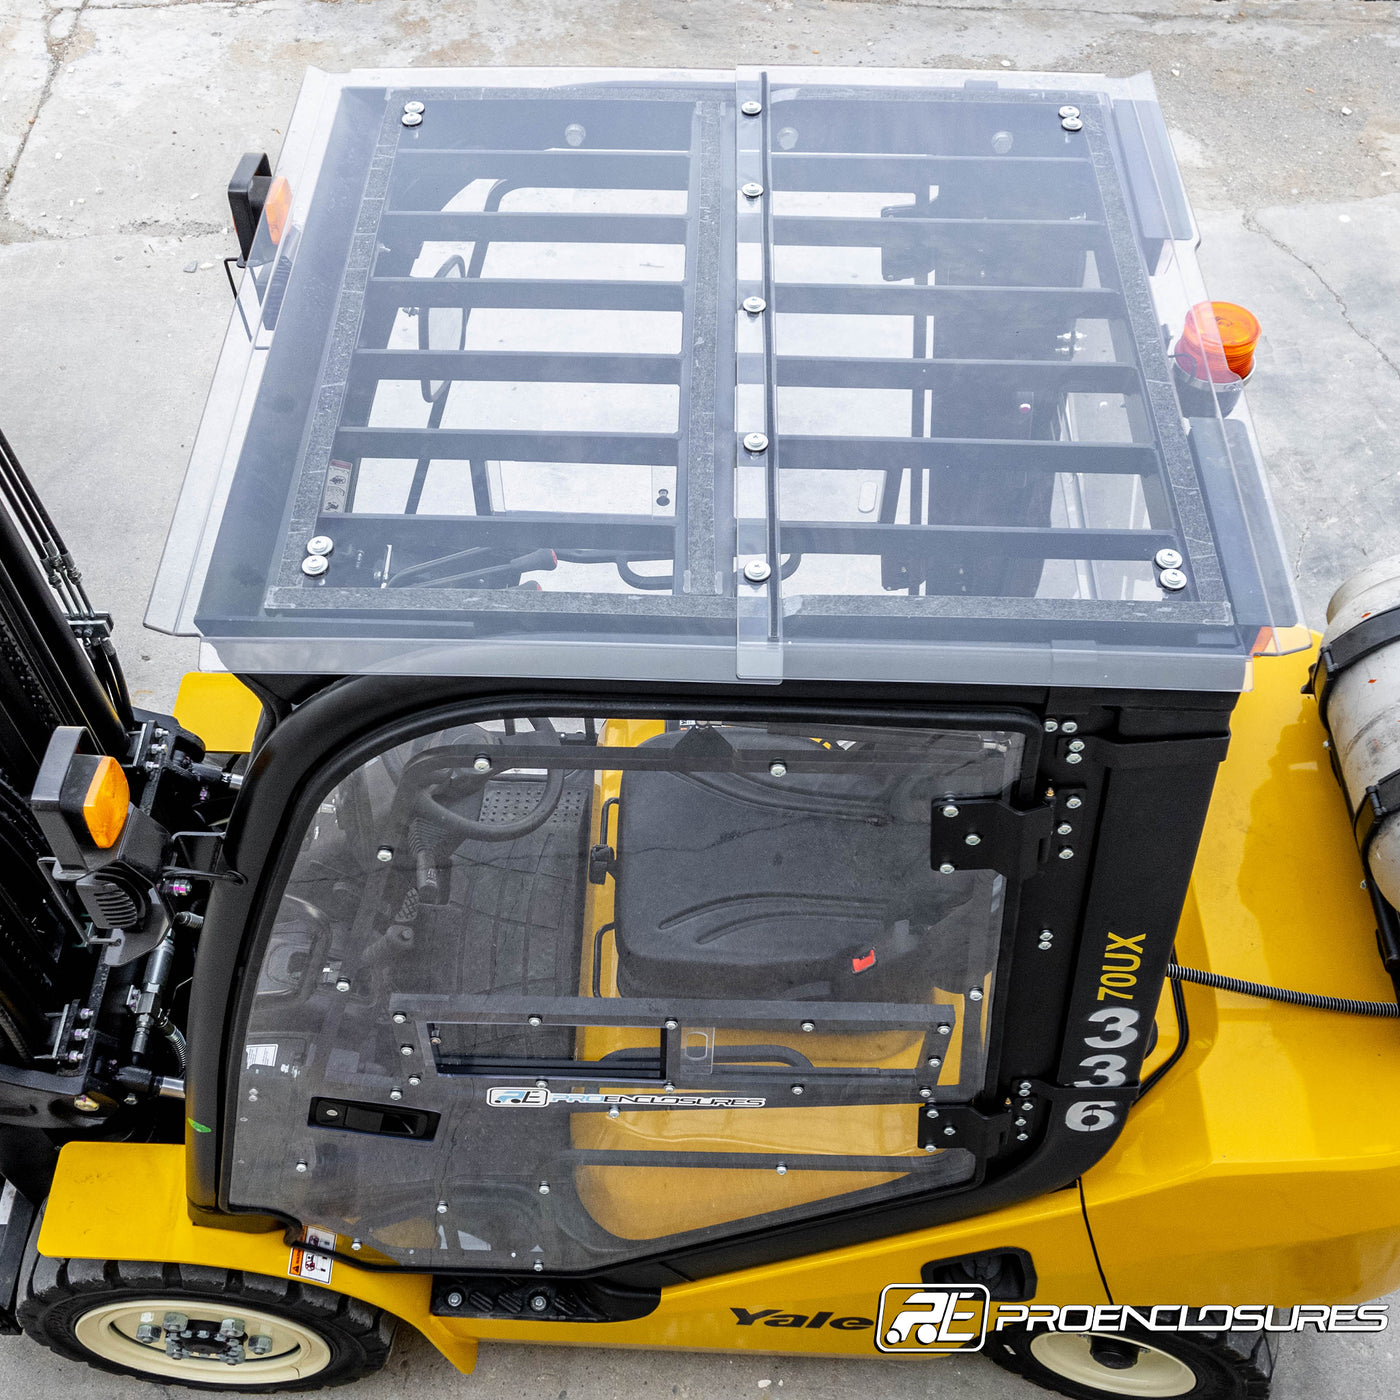 Yale 70UX forklift cab enclosure roof down view